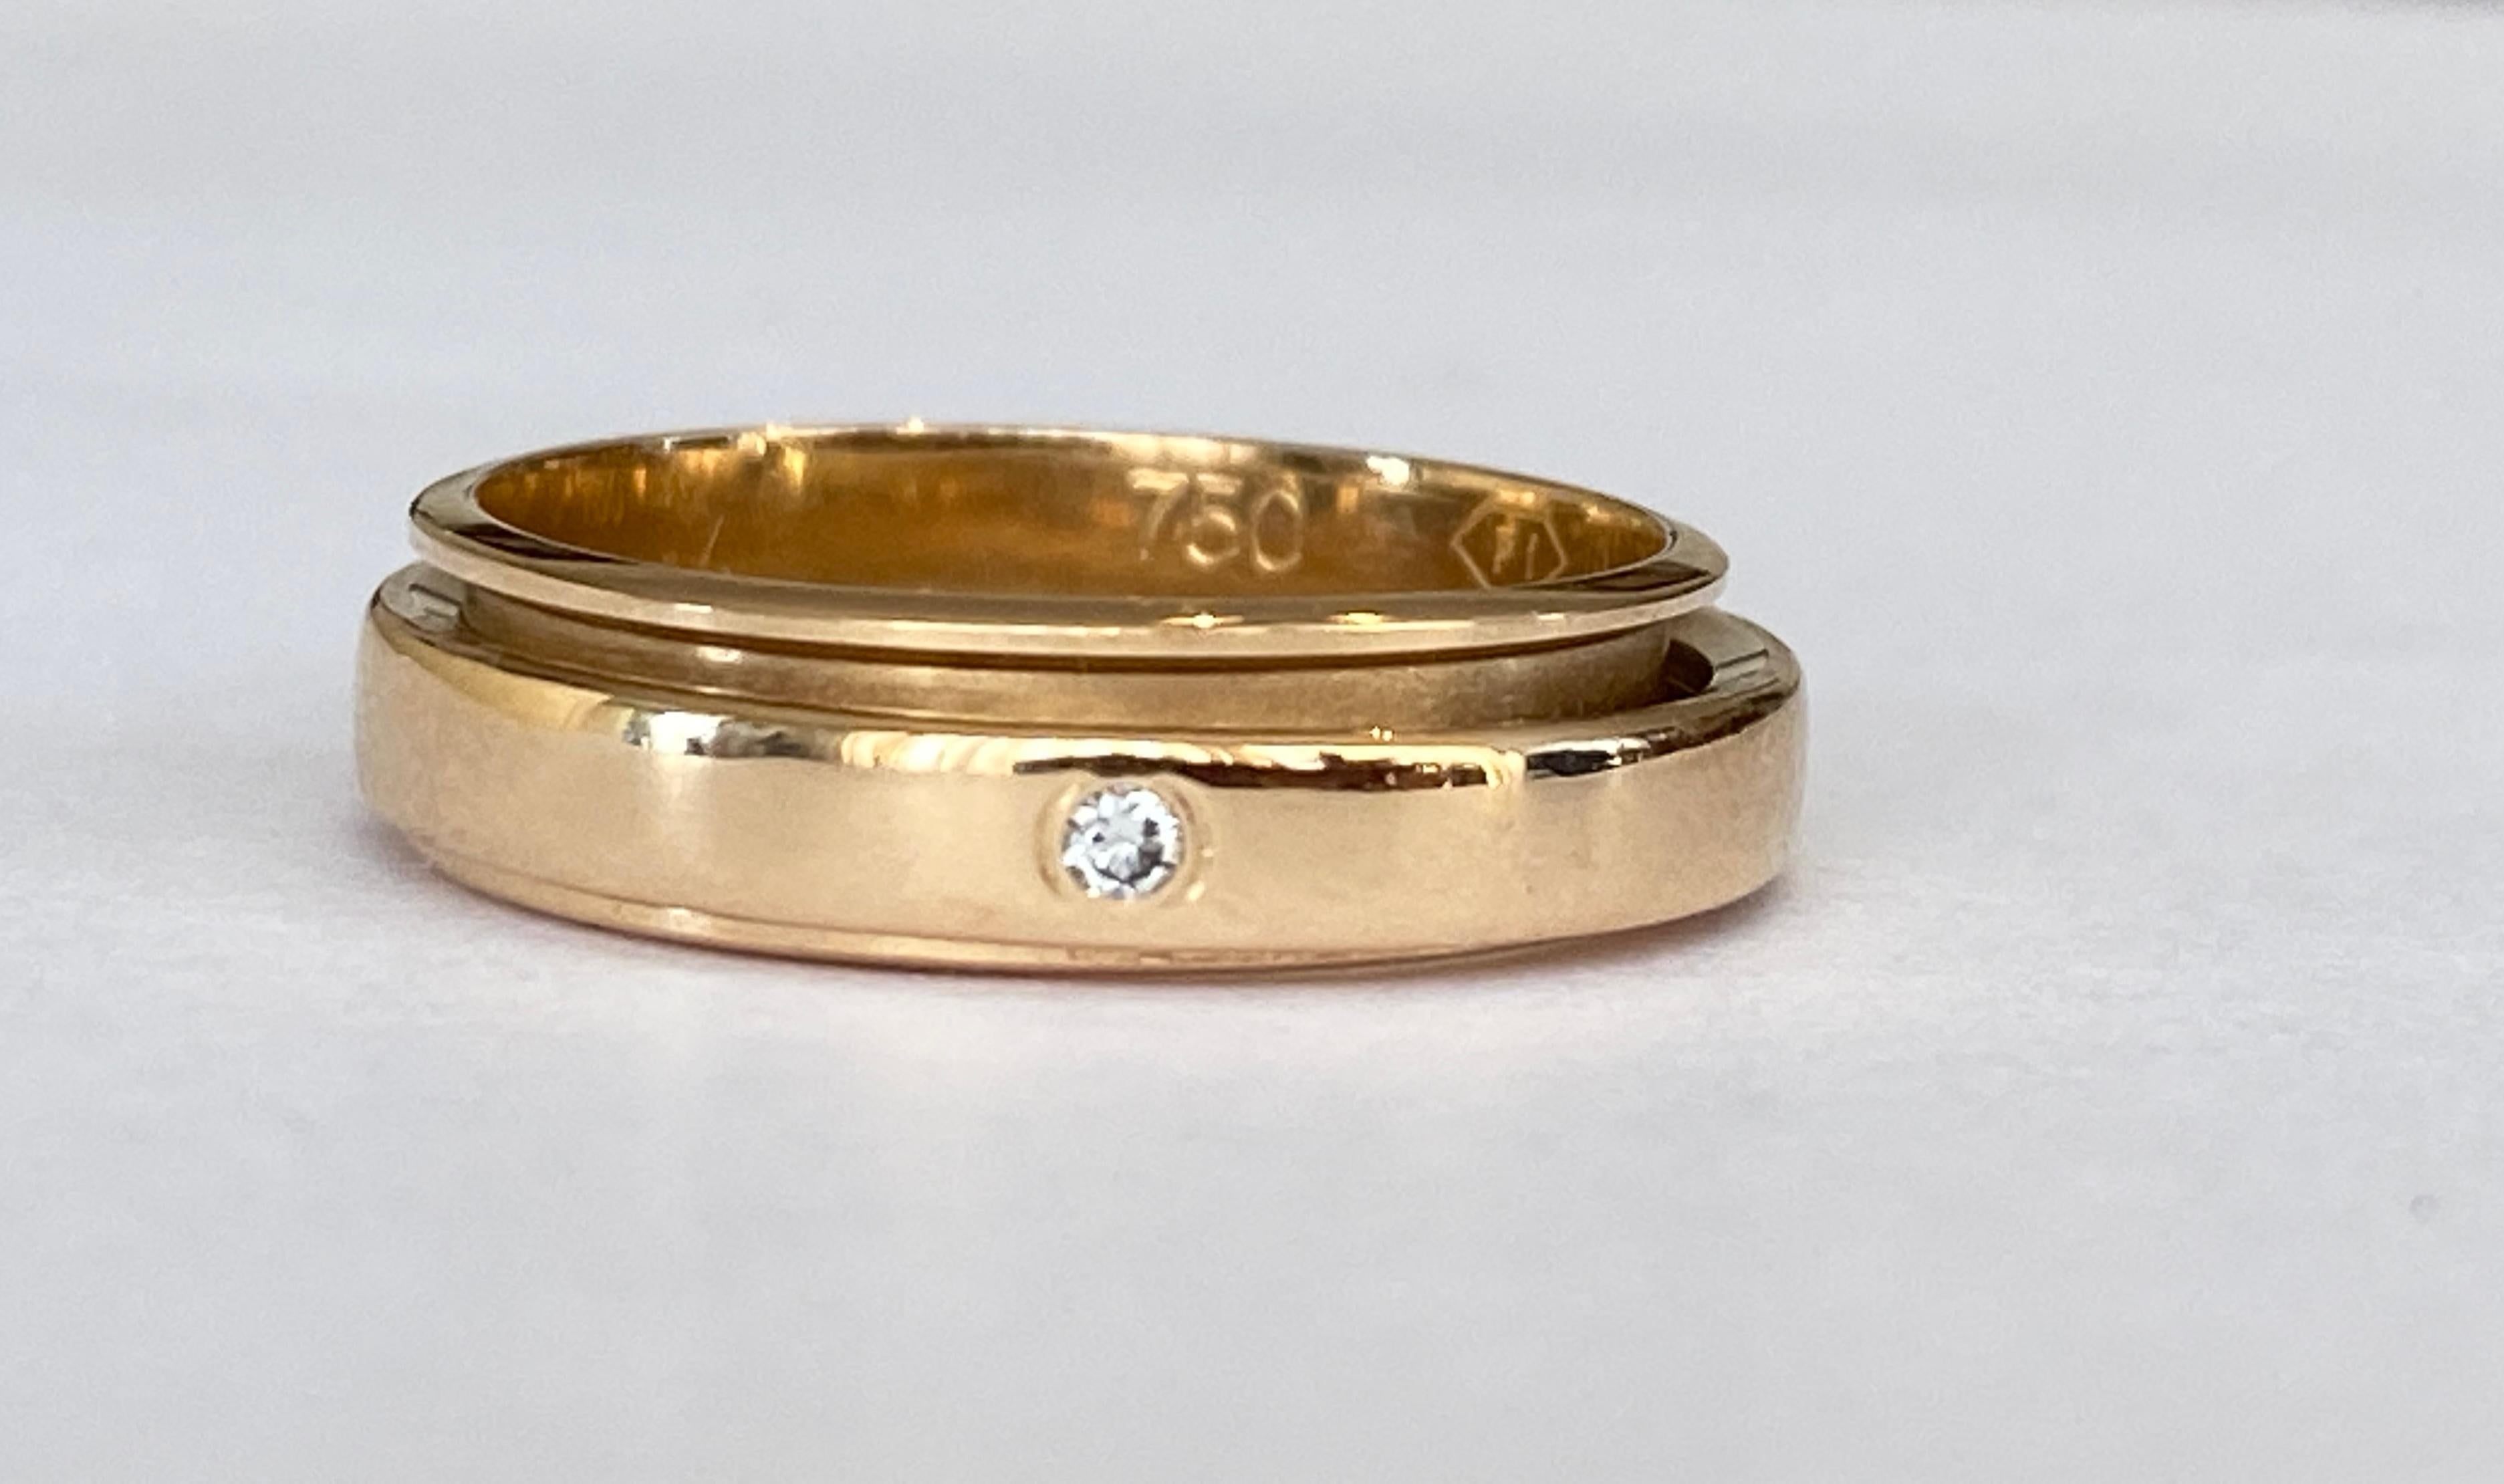 Offered in good condition is a rotating ladies Piaget ring, set with one diamond. Open ring Possession in yellow gold 18 kt, set with a brilliant cut diamond of approx. 0.02 ct of quality G/VS. Marked Piaget 750 numbered E40376, size 48/15.25 mm.